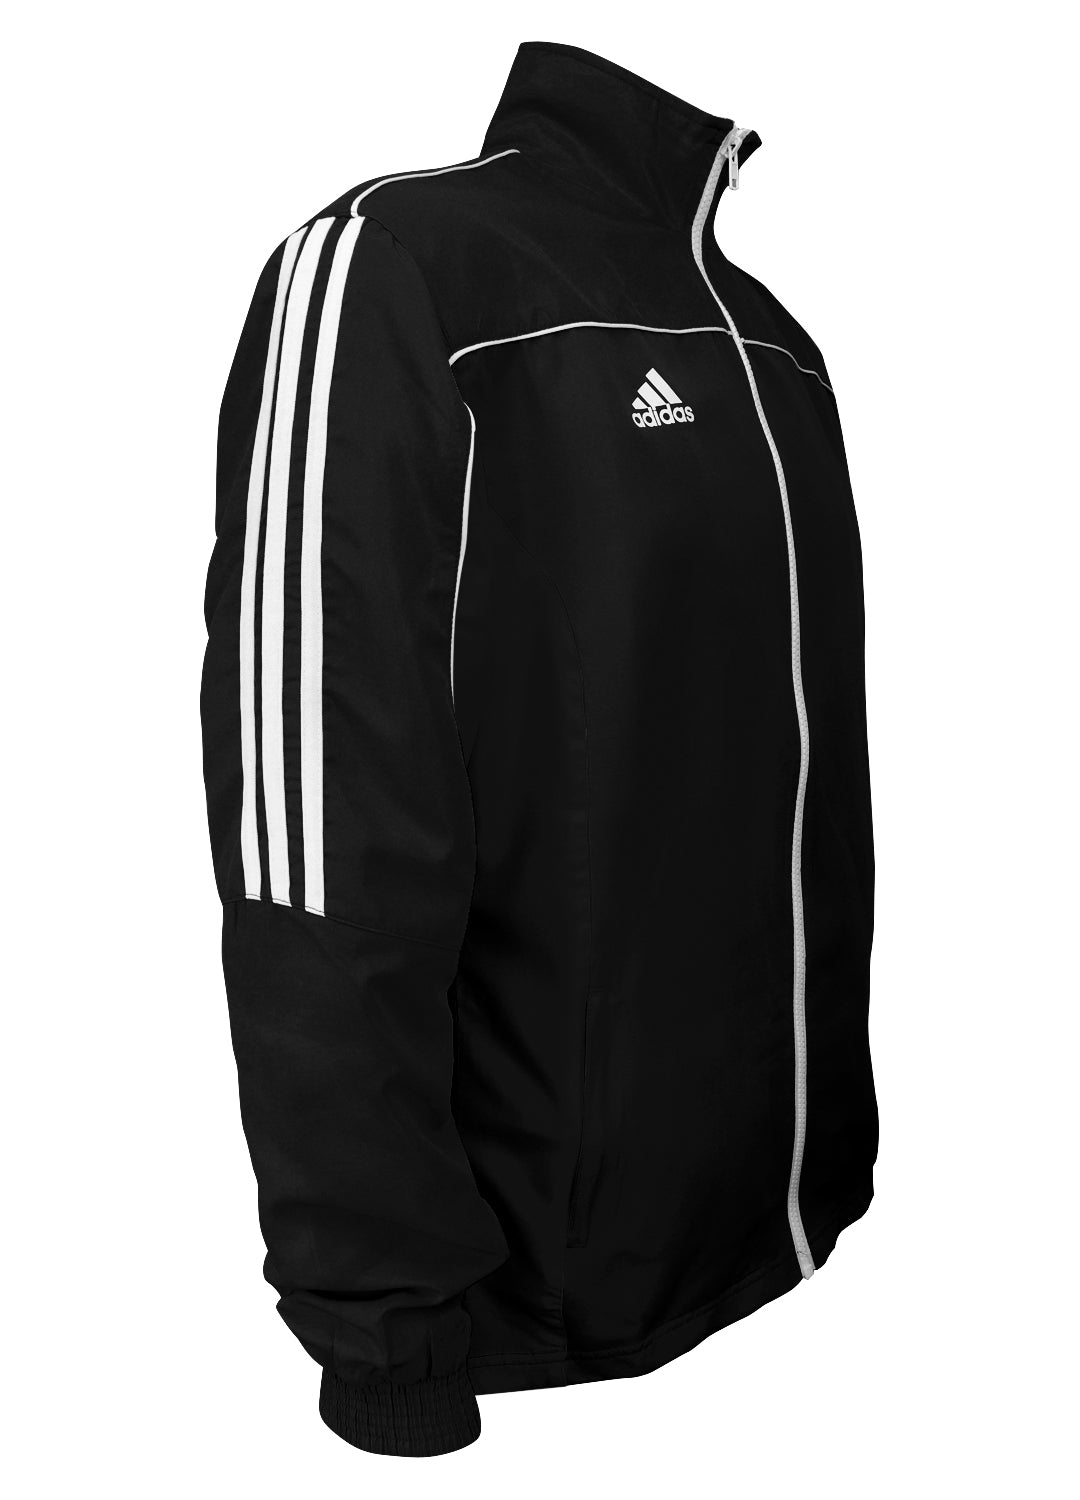 adidas Black with White Stripes Windbreaker Style Team Jacket Side View